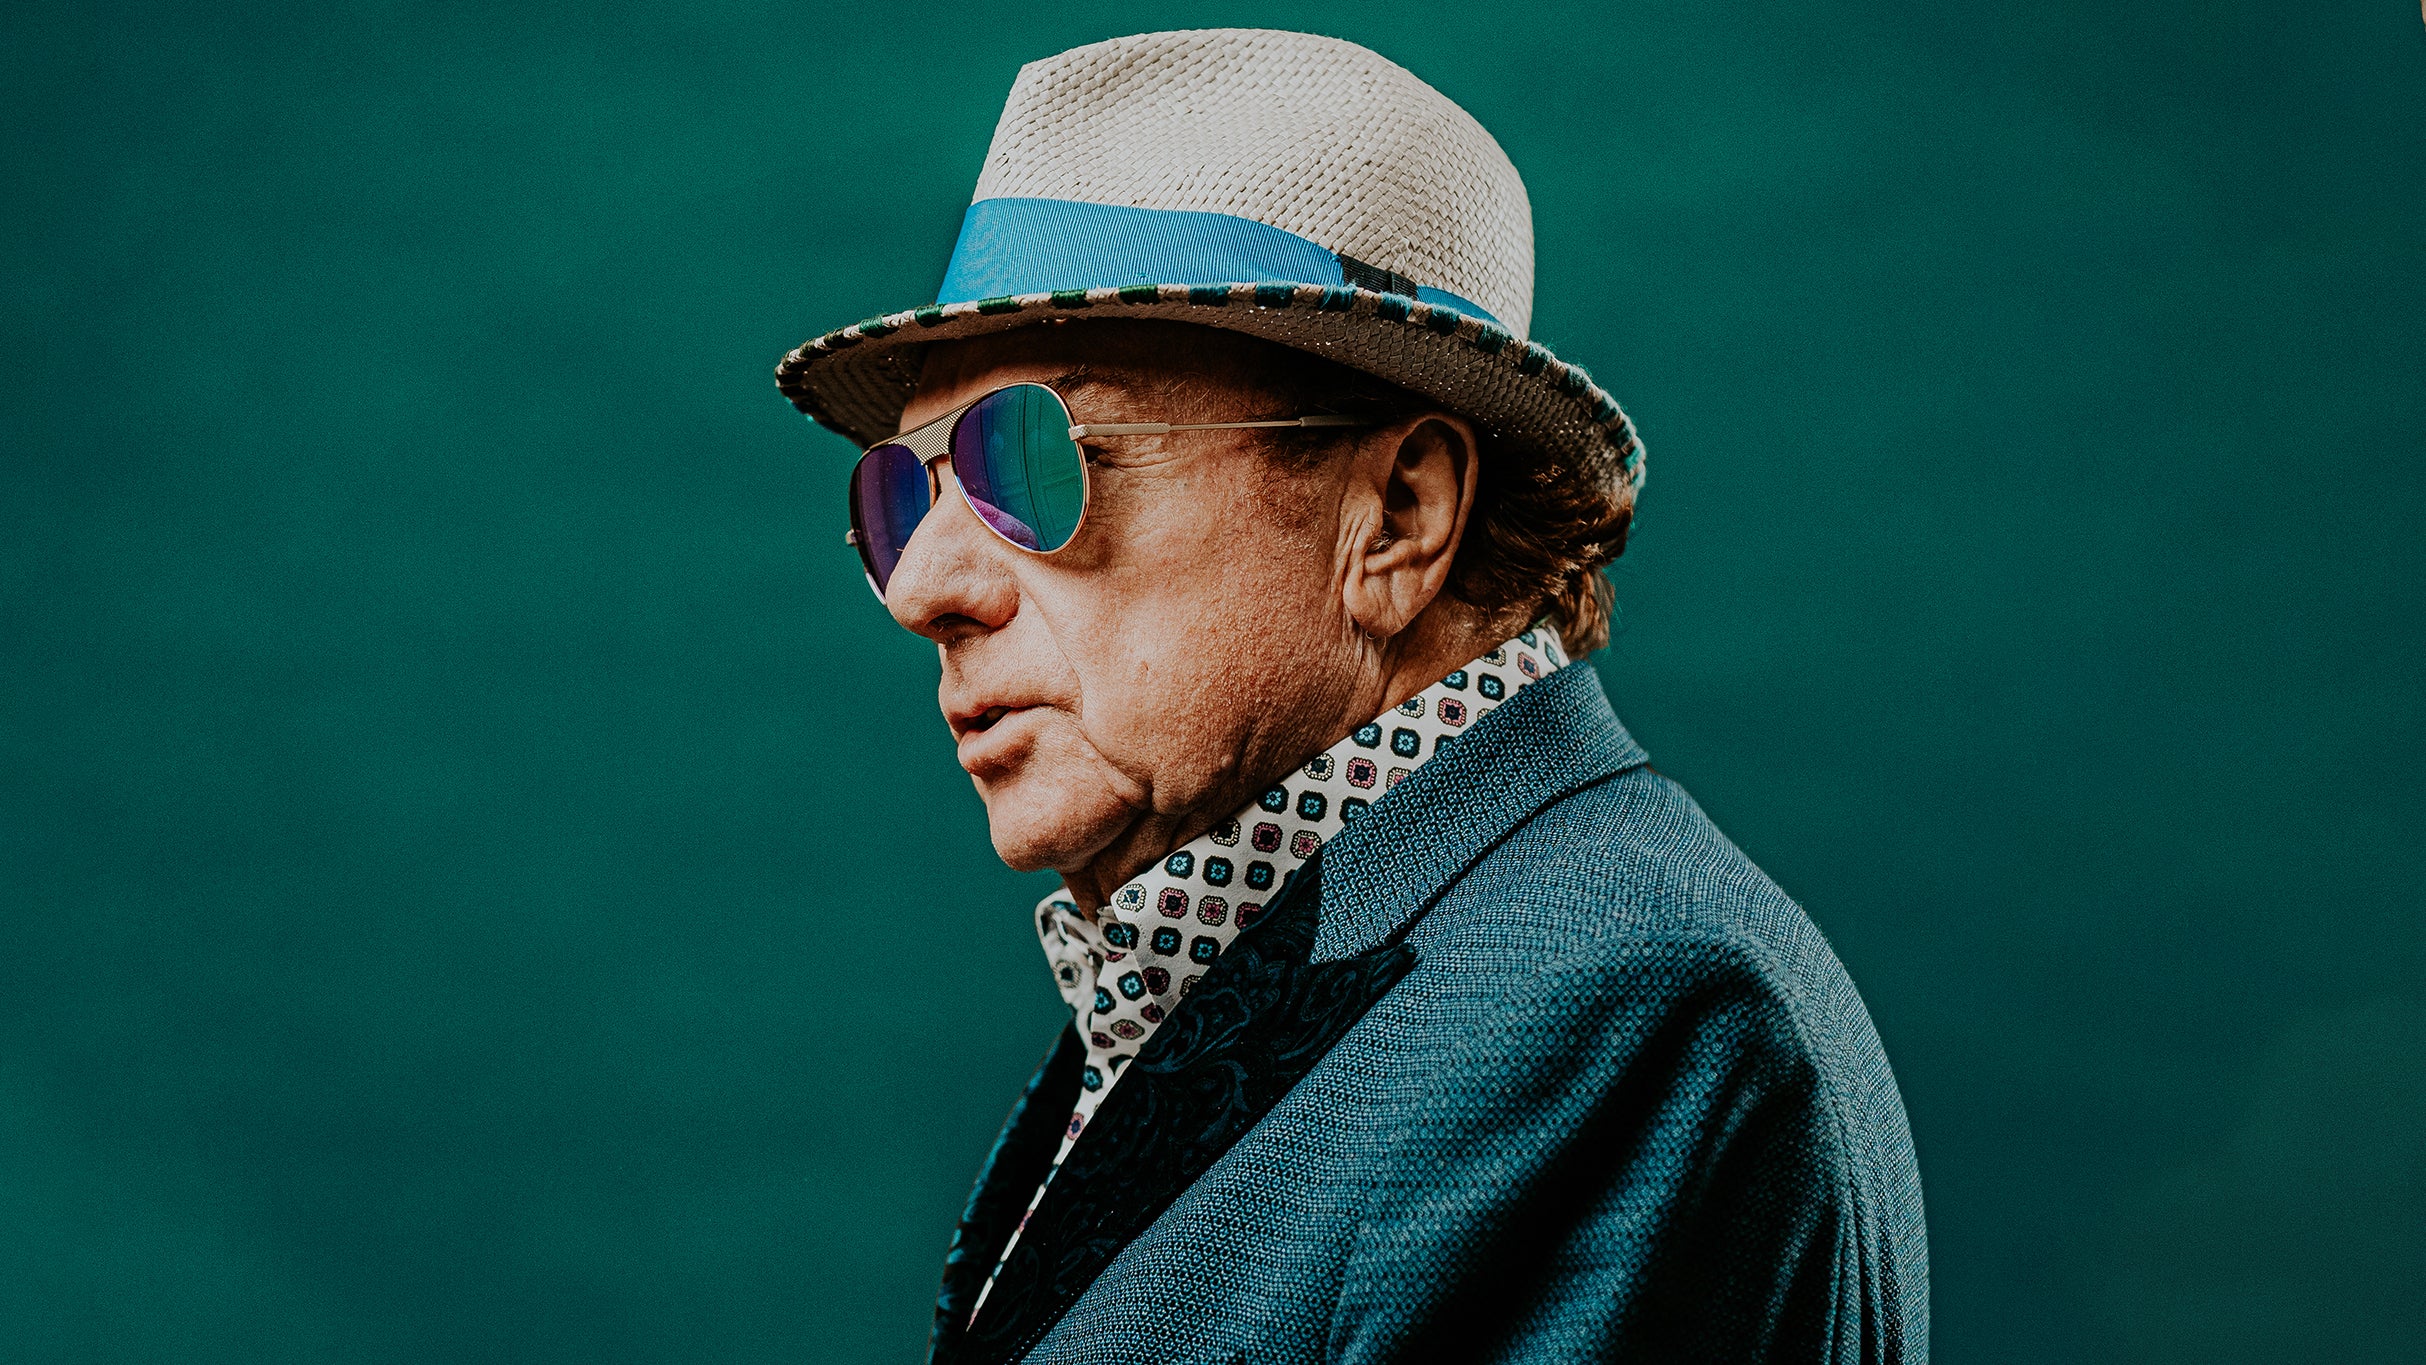 Van Morrison - Westonbirt Arboretum Forest free presale pasword for early tickets in Gloucestershire